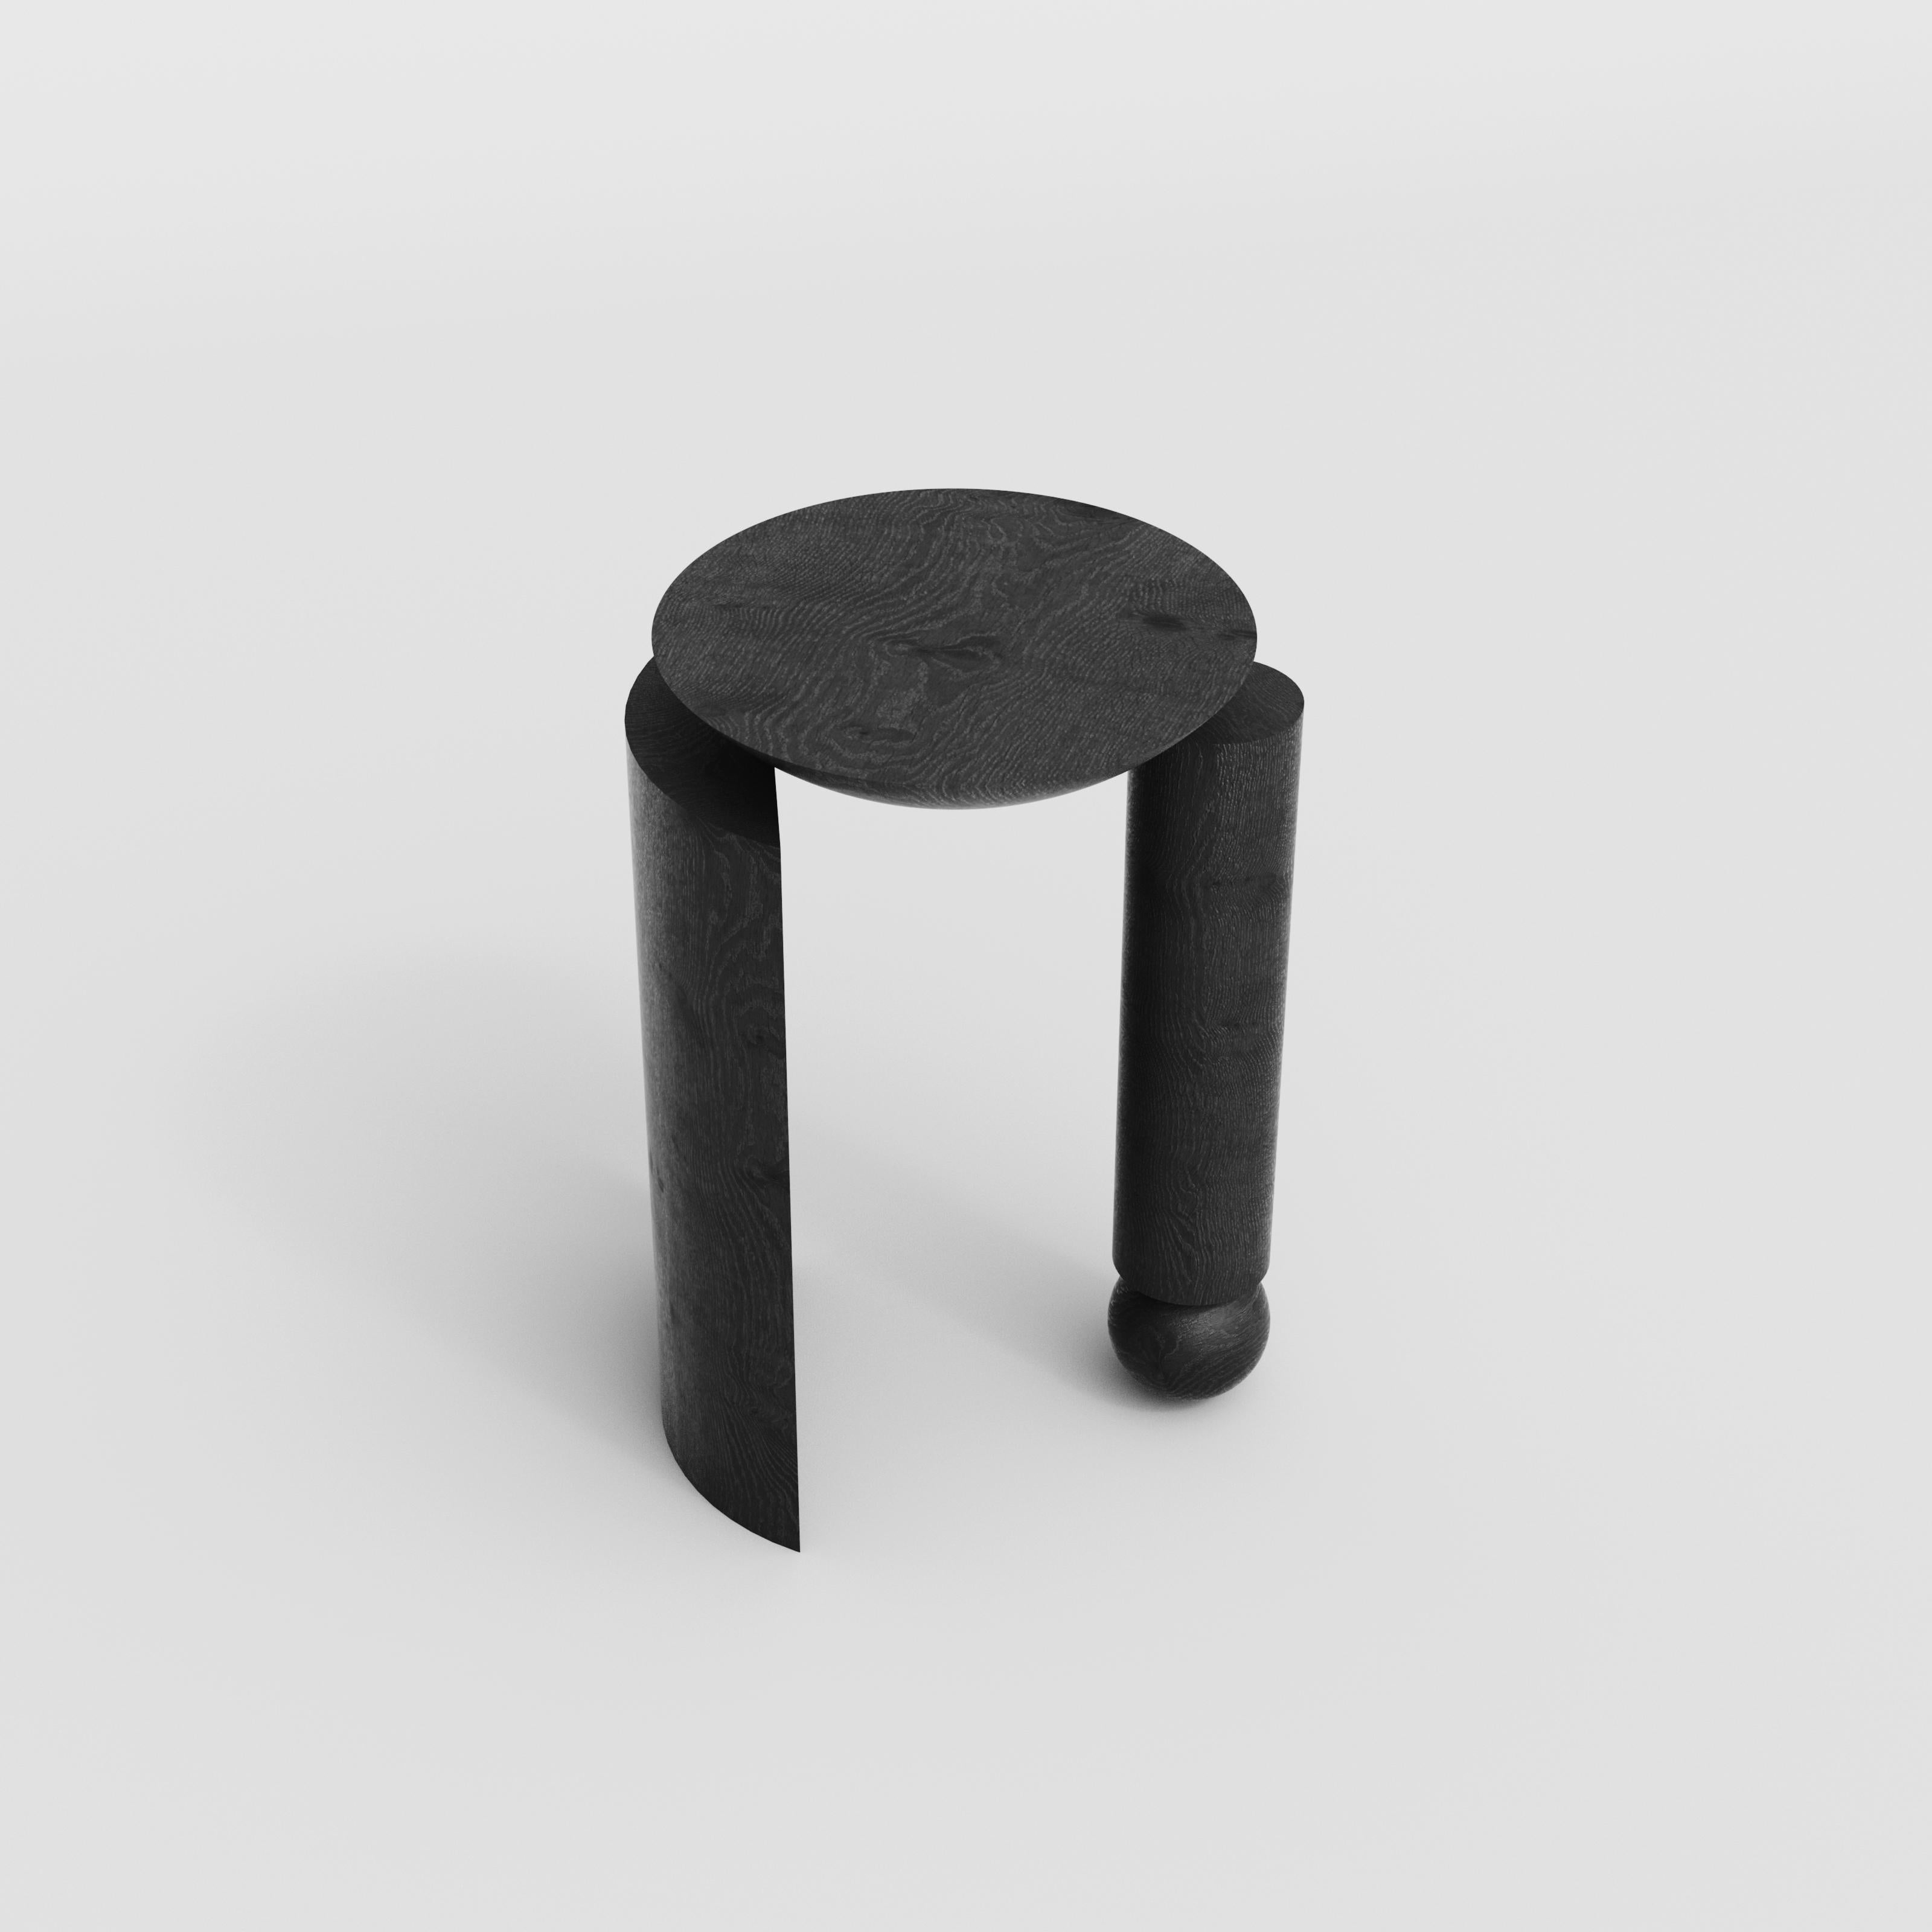 Minimalist Teta Sculptural Side Table or Stool in Tropical Hardwood by Pedro Paulo Venzon For Sale